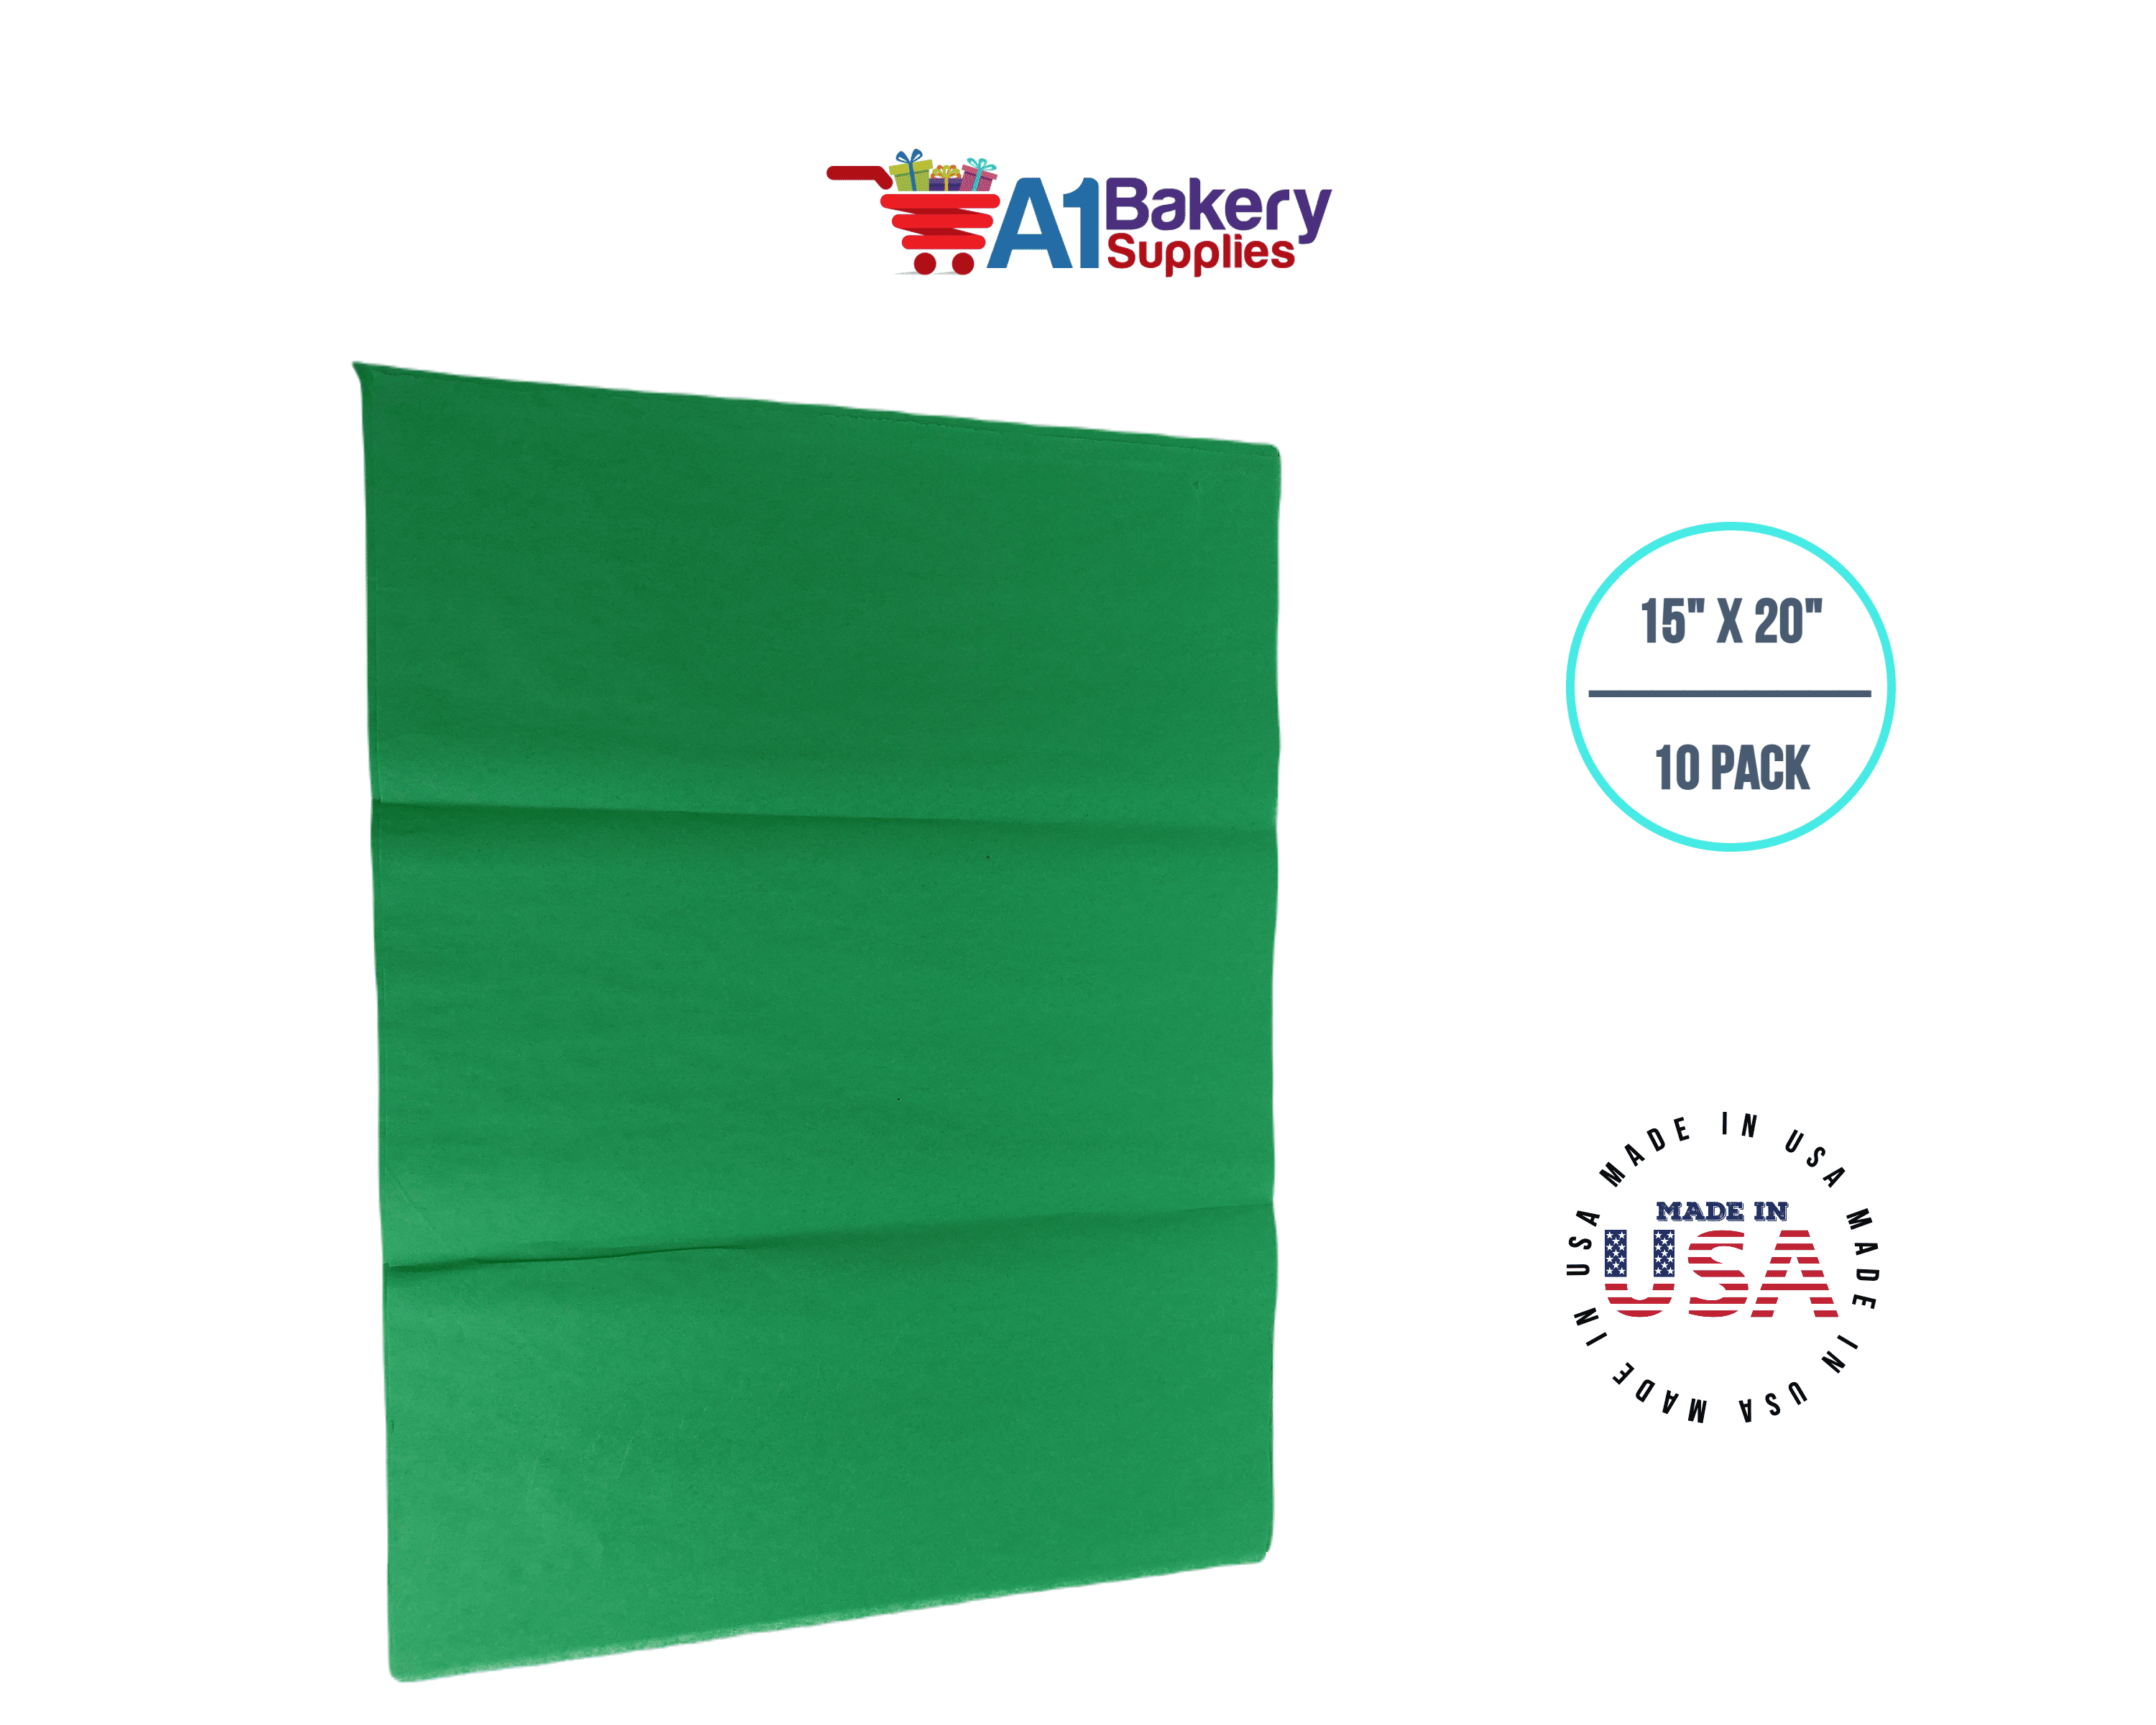 Feronia Packaging Emerald Green Tissue Paper Squares, Bulk 10 Sheets, Premium Gift Wrap and Art Supplies for Birthdays, Holidays, or Presents, Large